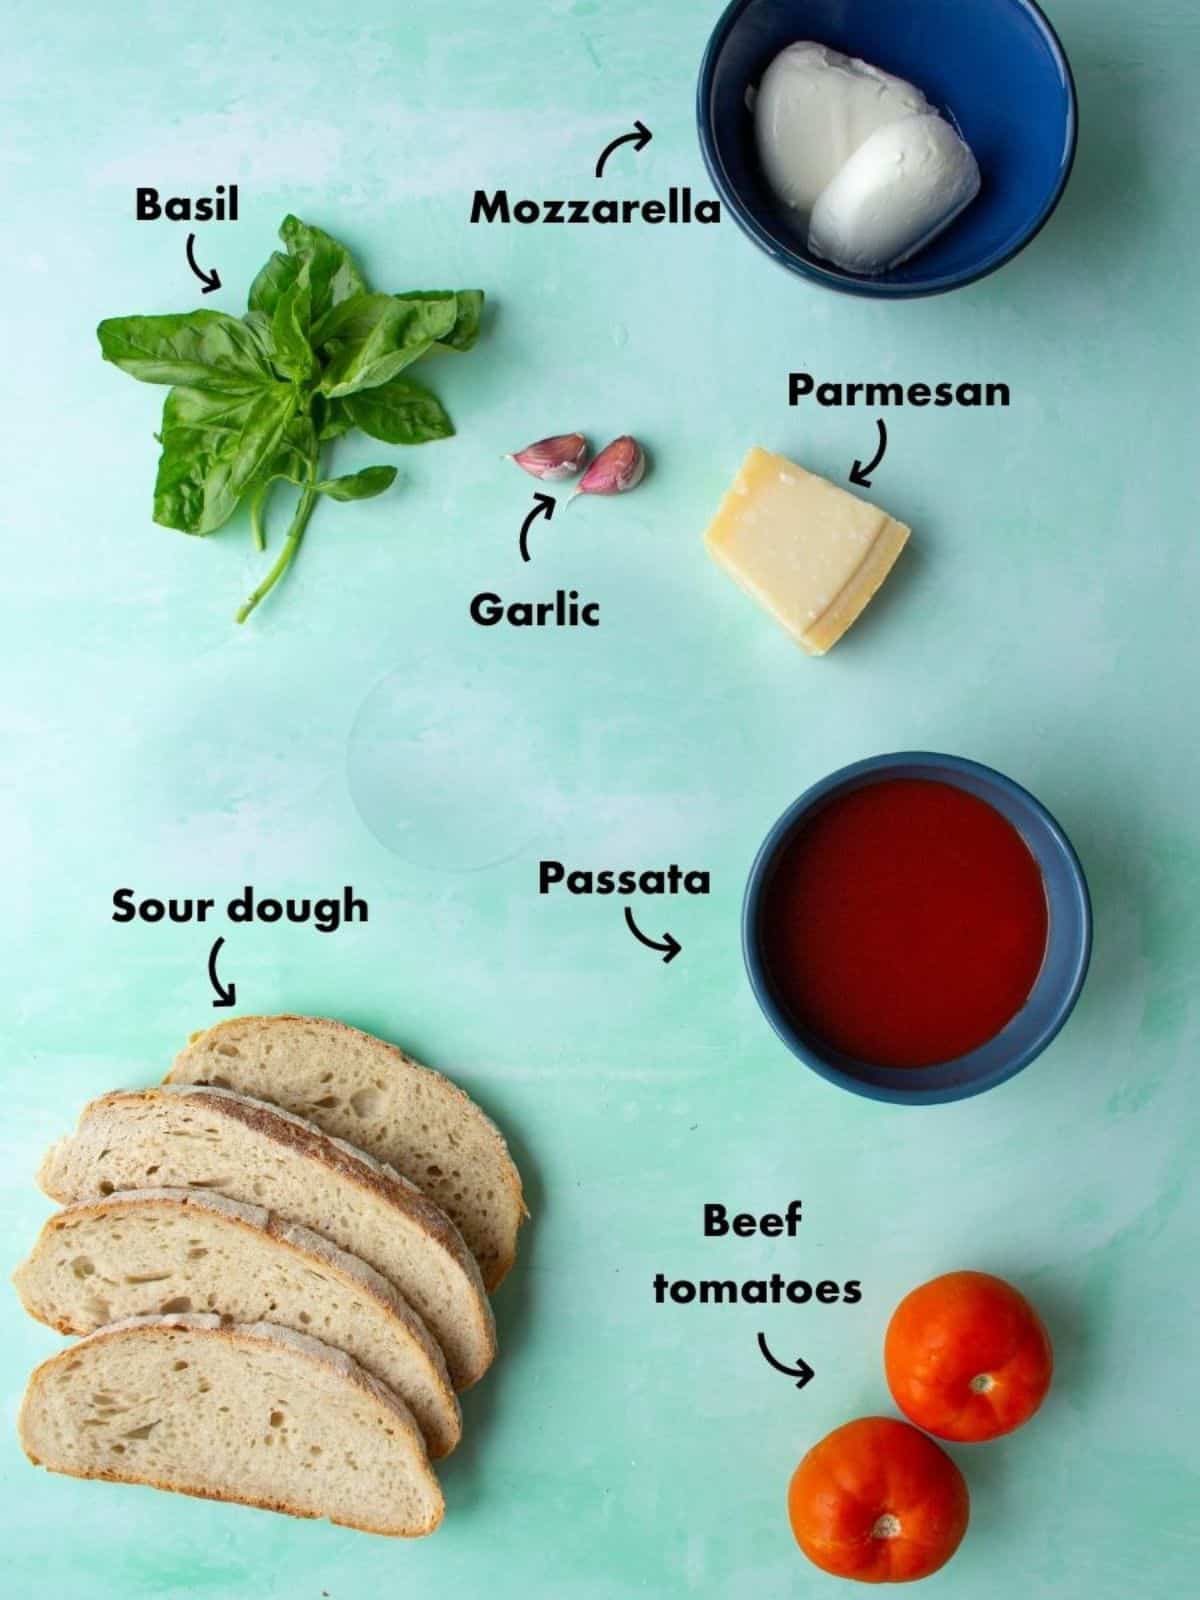 Ingredients to make pizza toast laid out on a pale blue background and labelled.